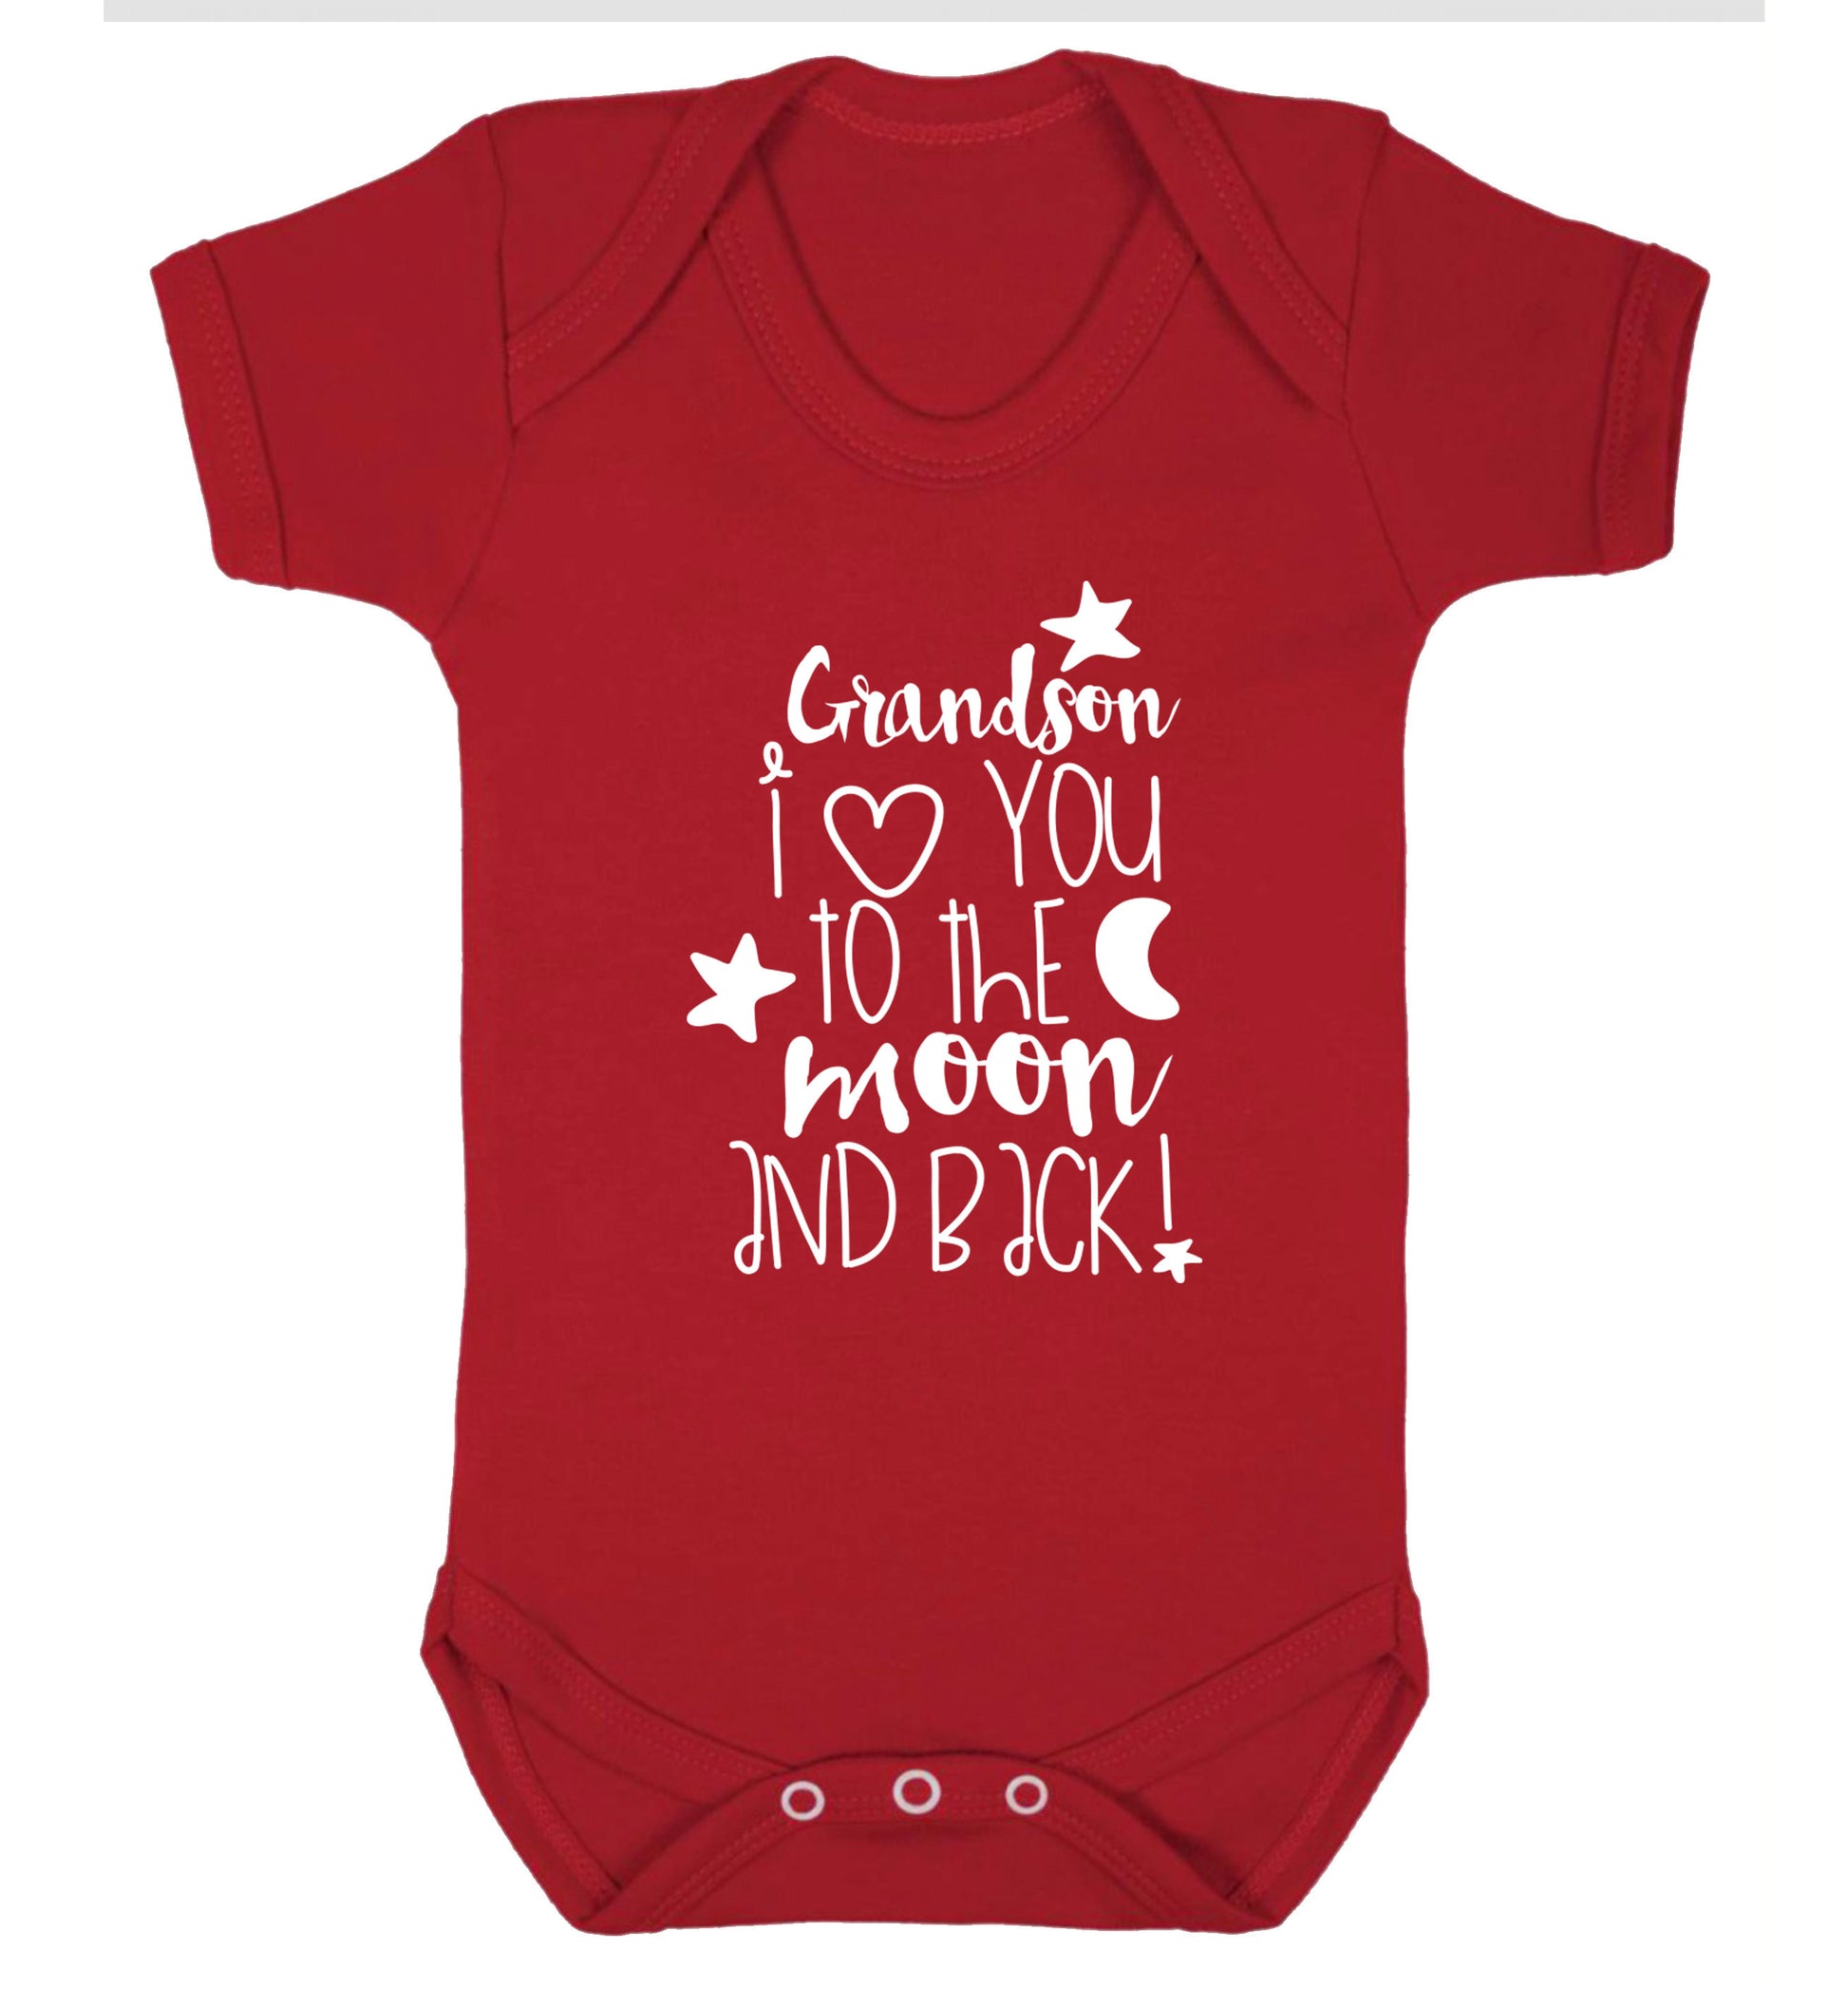 Grandson I love you to the moon and back Baby Vest red 18-24 months